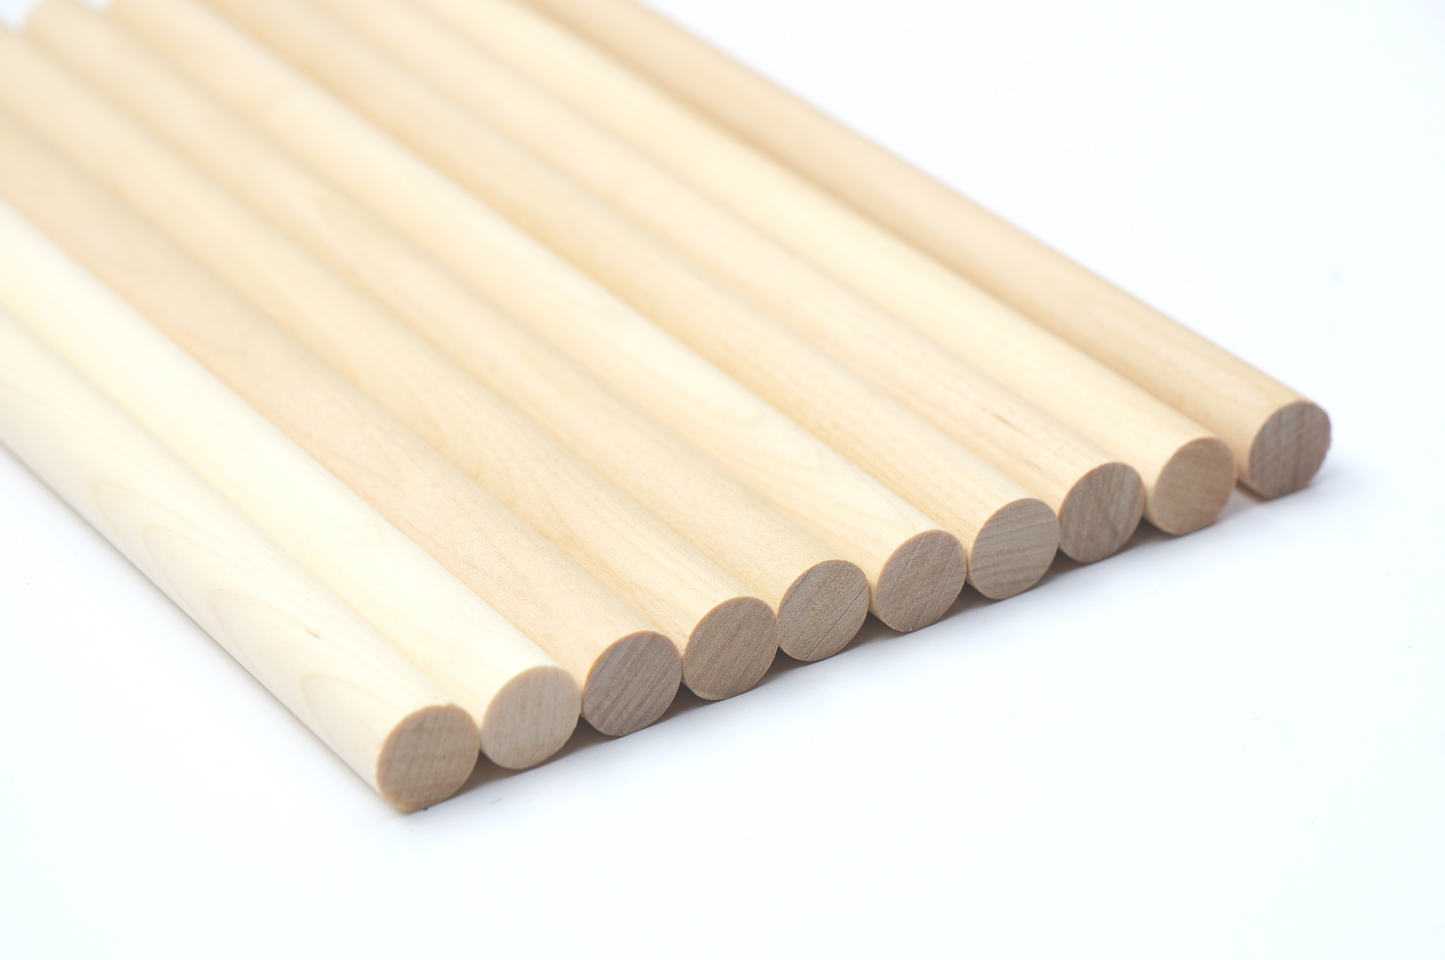 Wooden Dowel (2 sizes available)